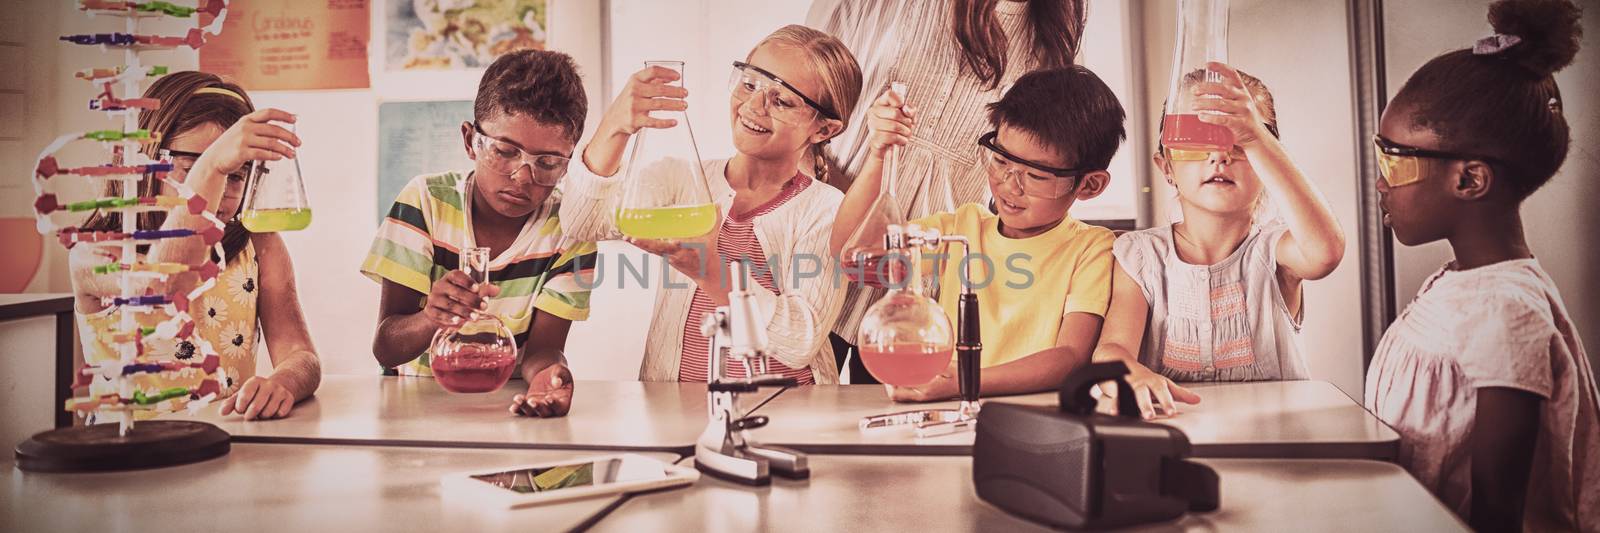 Smiling children doing science project by Wavebreakmedia